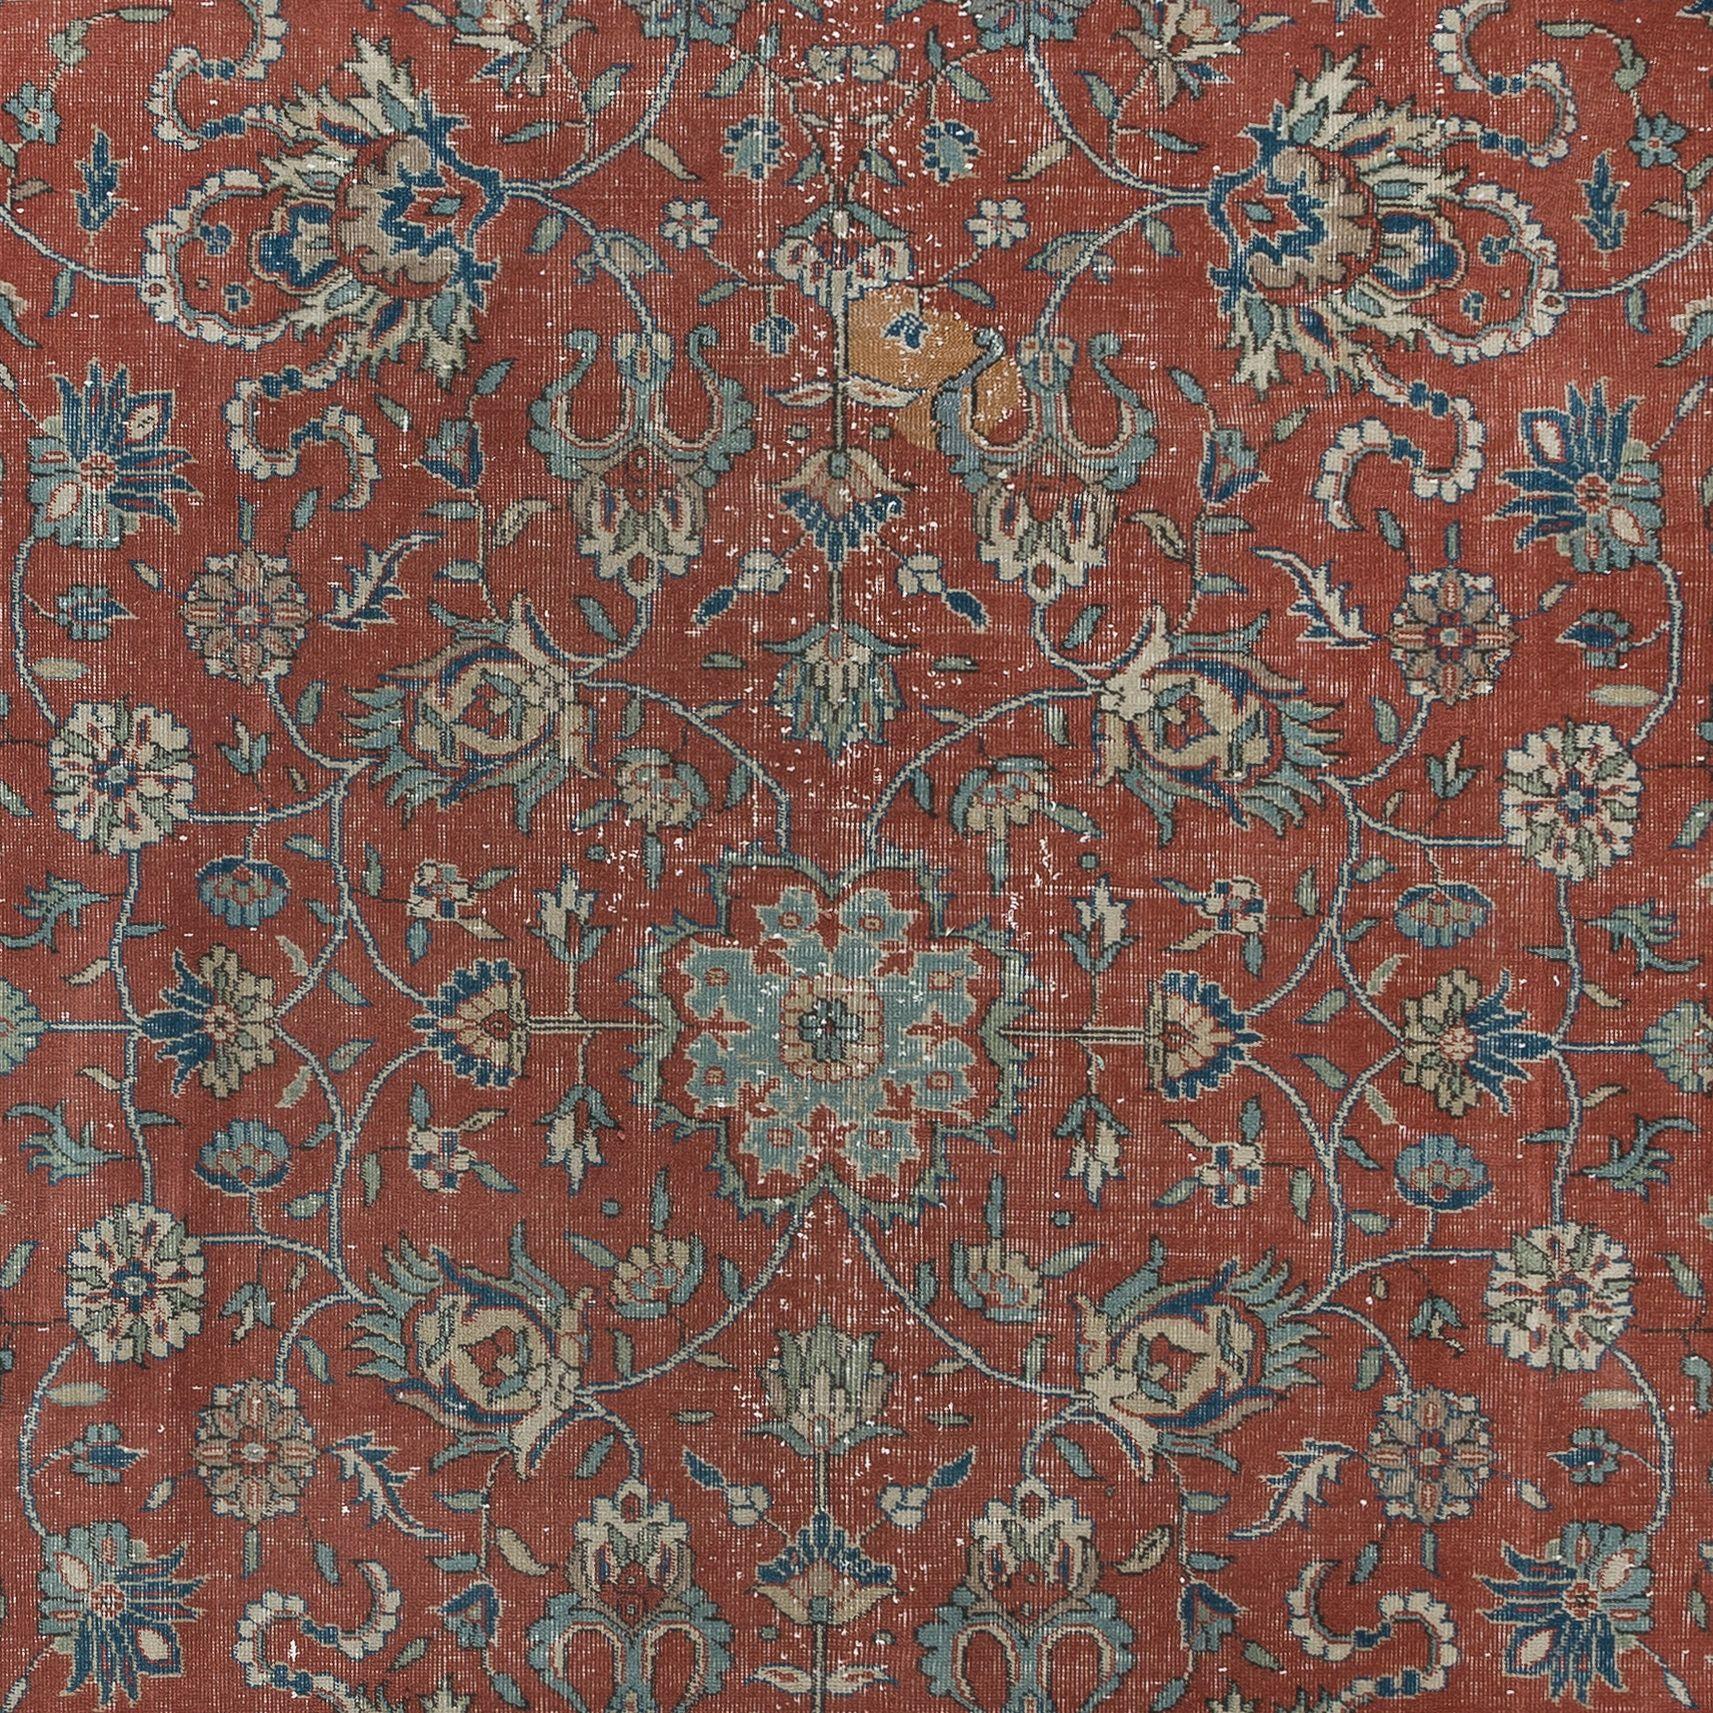 8x11.3 Ft Romantic Vintage Handmade Turkish Botanical Design Rug in Red & Beige In Good Condition For Sale In Philadelphia, PA